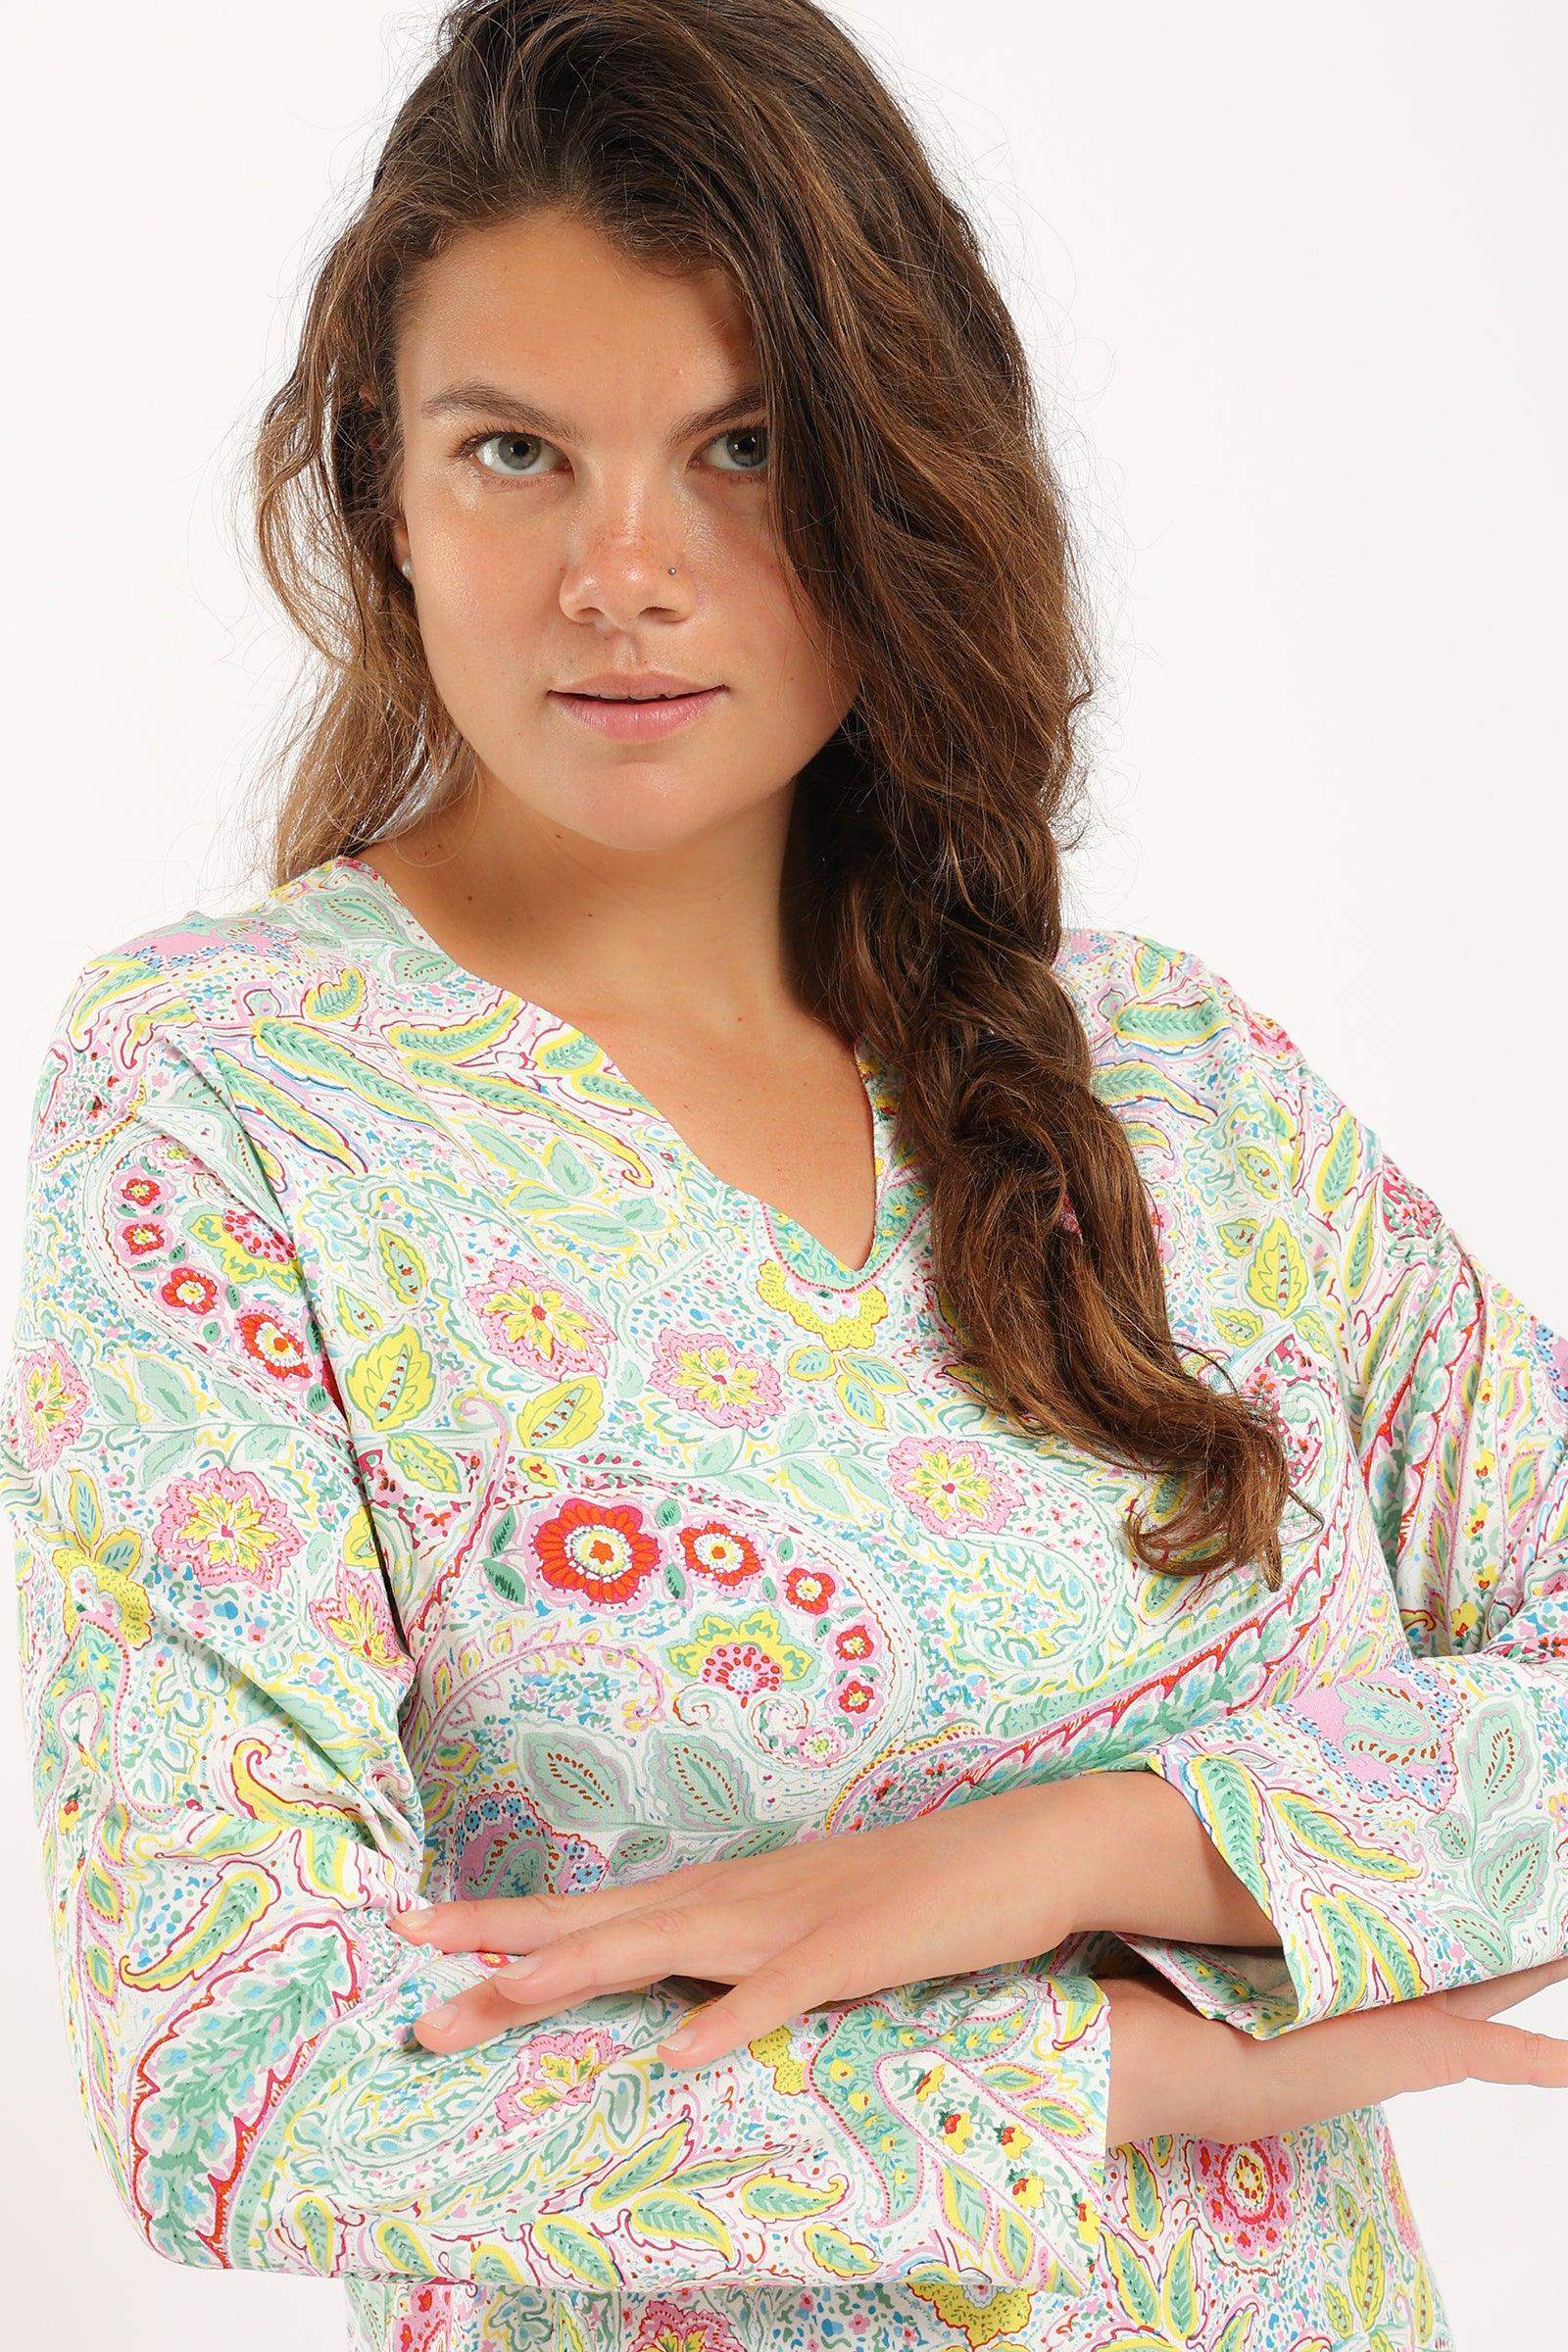 Printed Multicolor Nightgown - Carina - كارينا